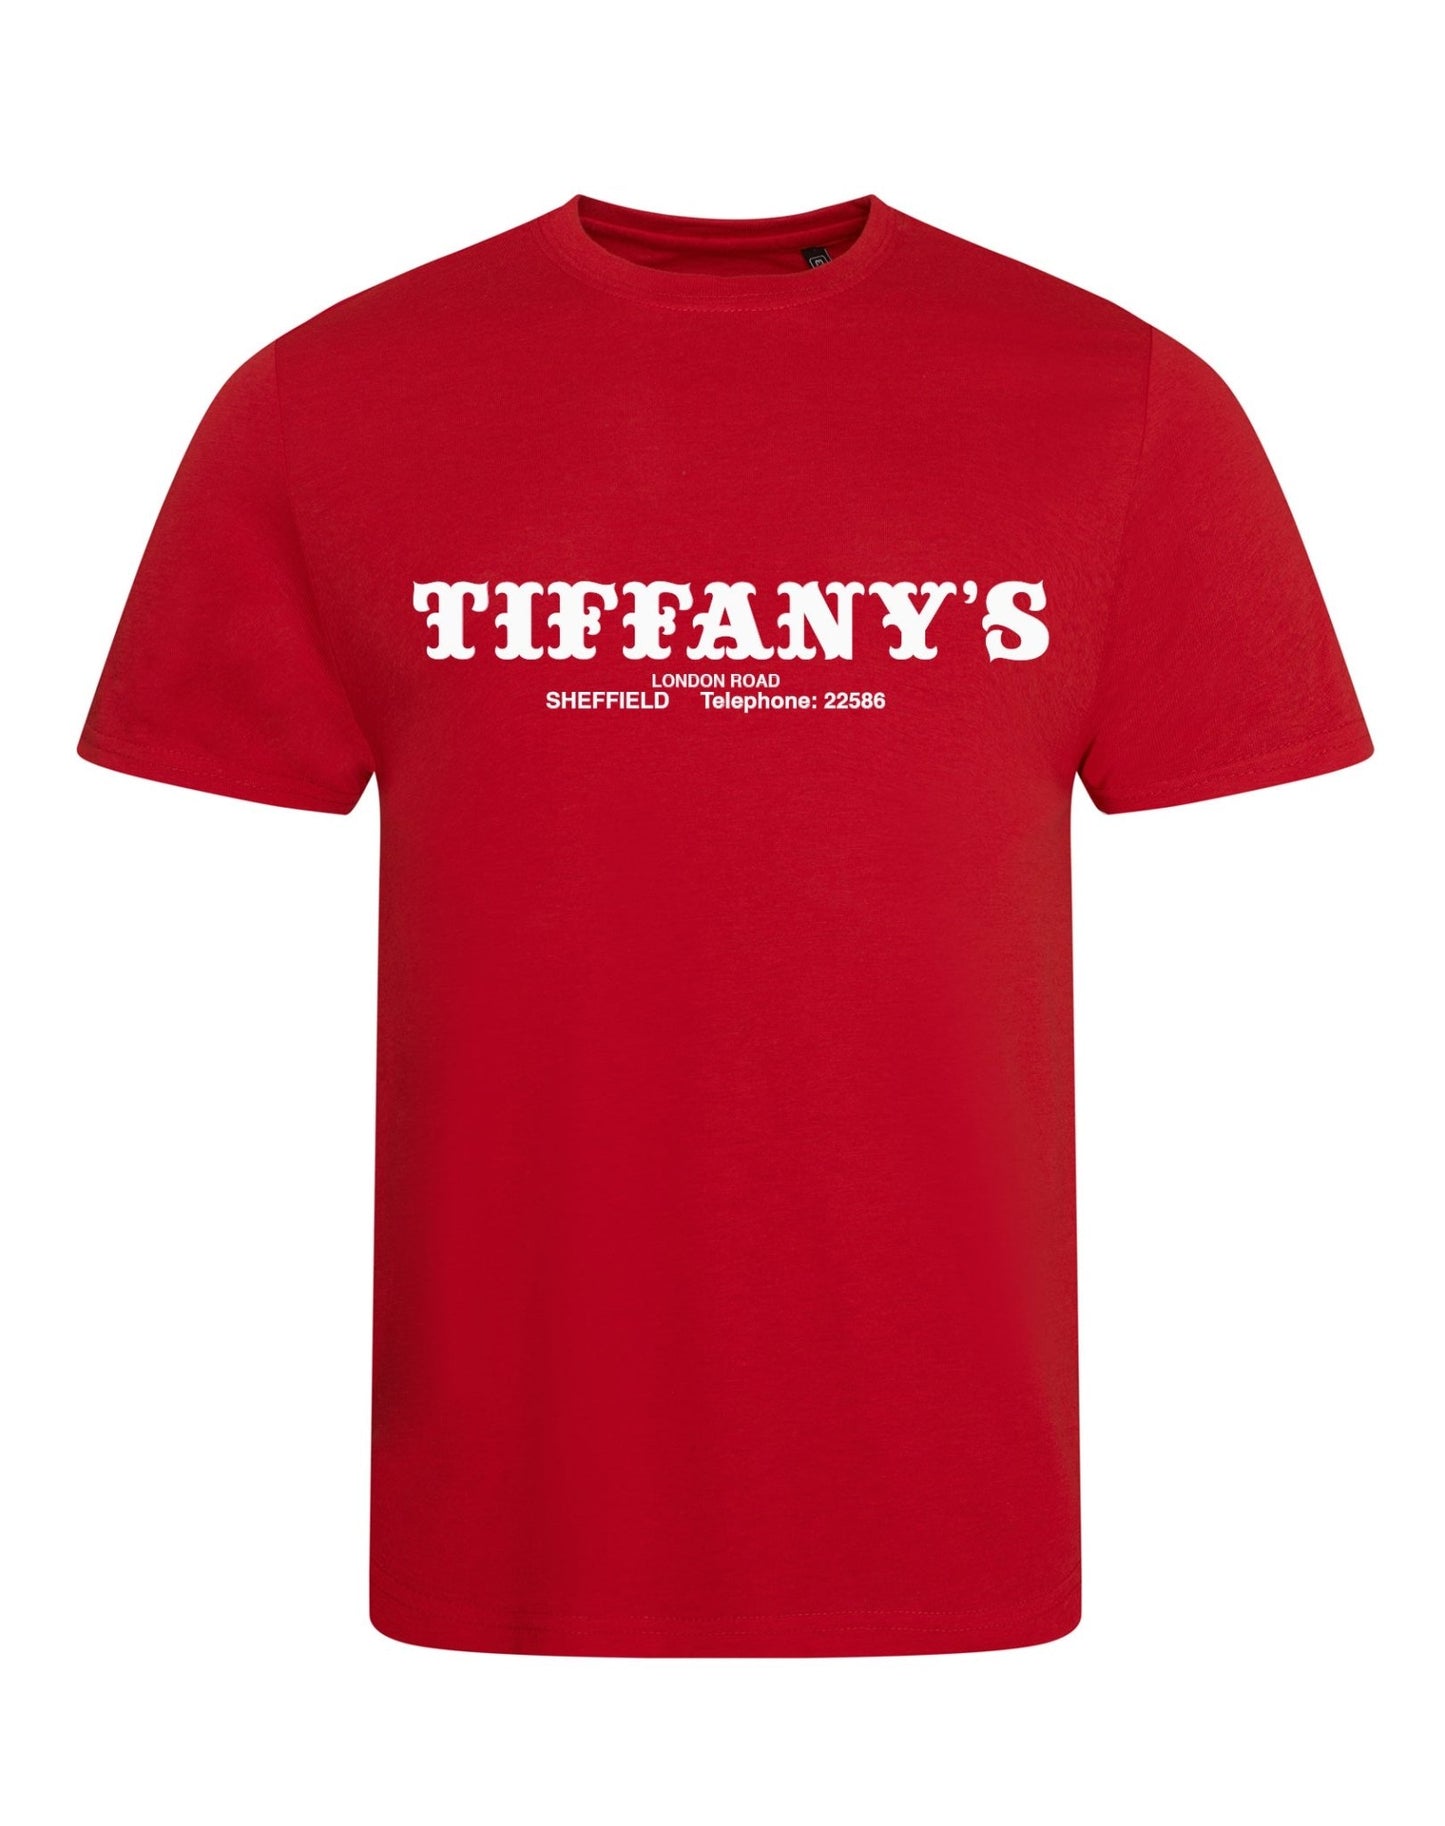 Tiffany's Sheffield unisex fit T-shirt - various colours - Dirty Stop Outs